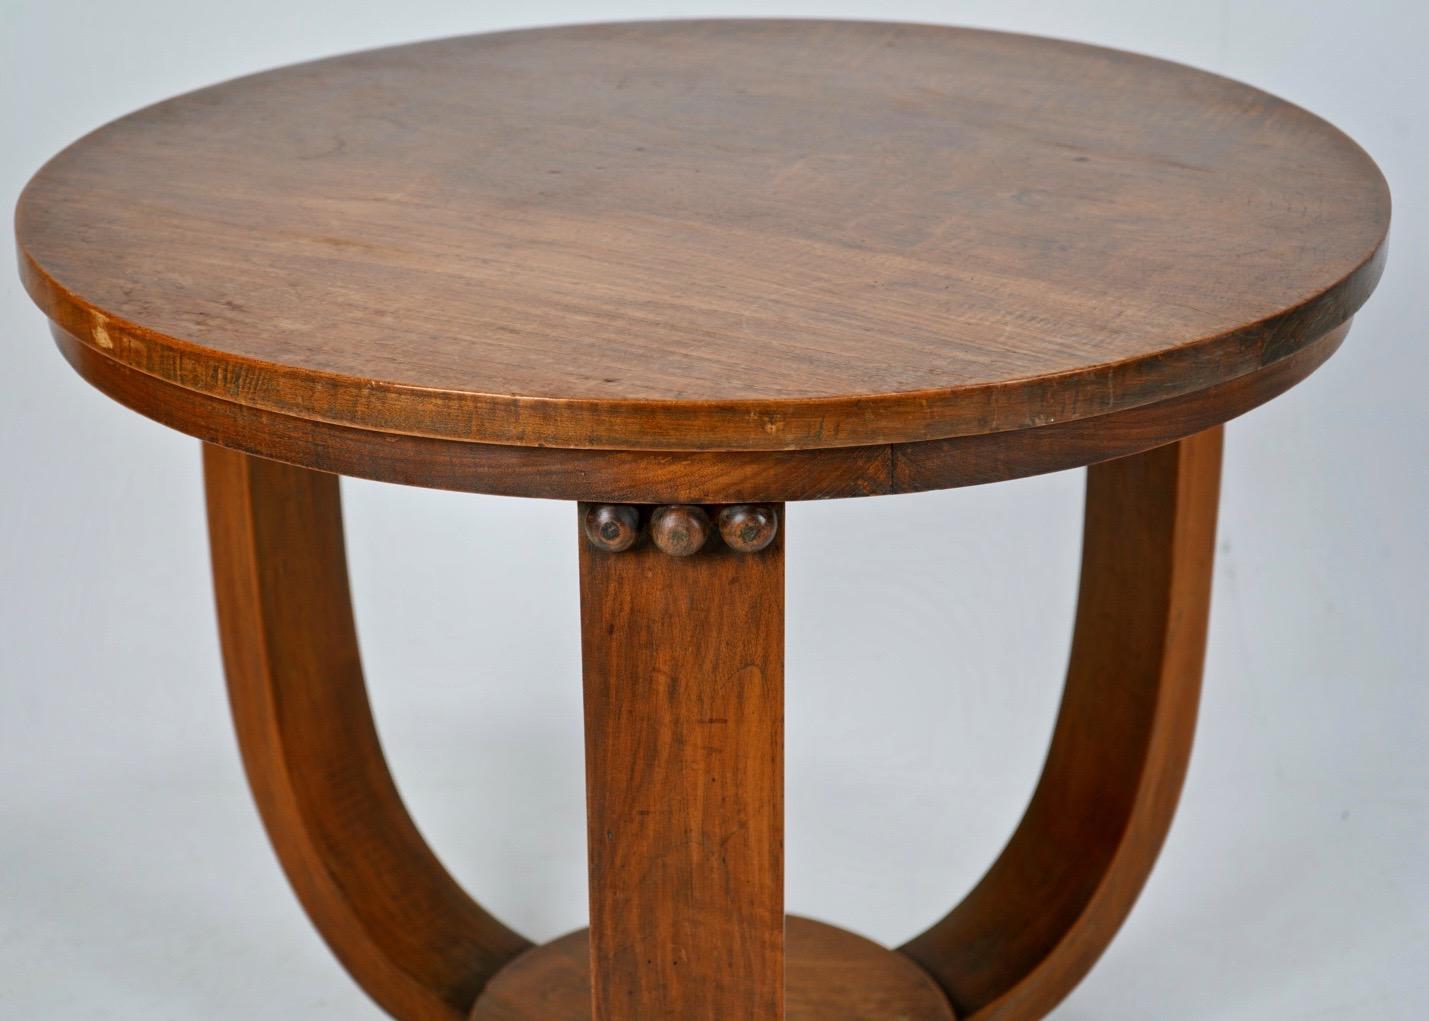 1930s Gueridon Pedestal Table In Good Condition For Sale In Dorchester, GB